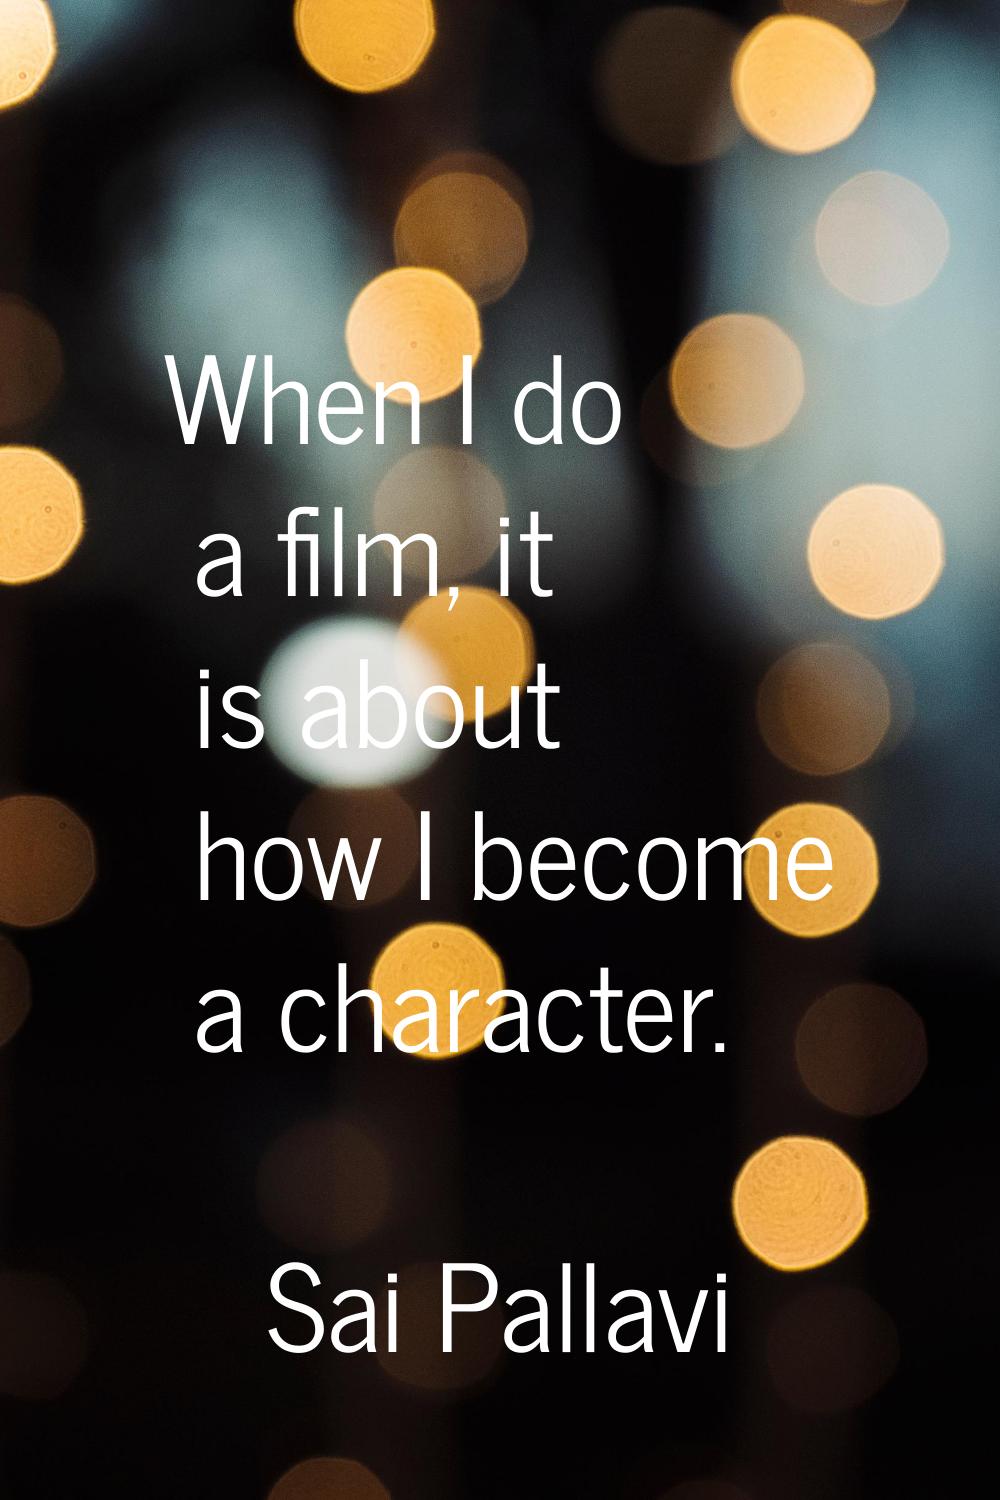 When I do a film, it is about how I become a character.